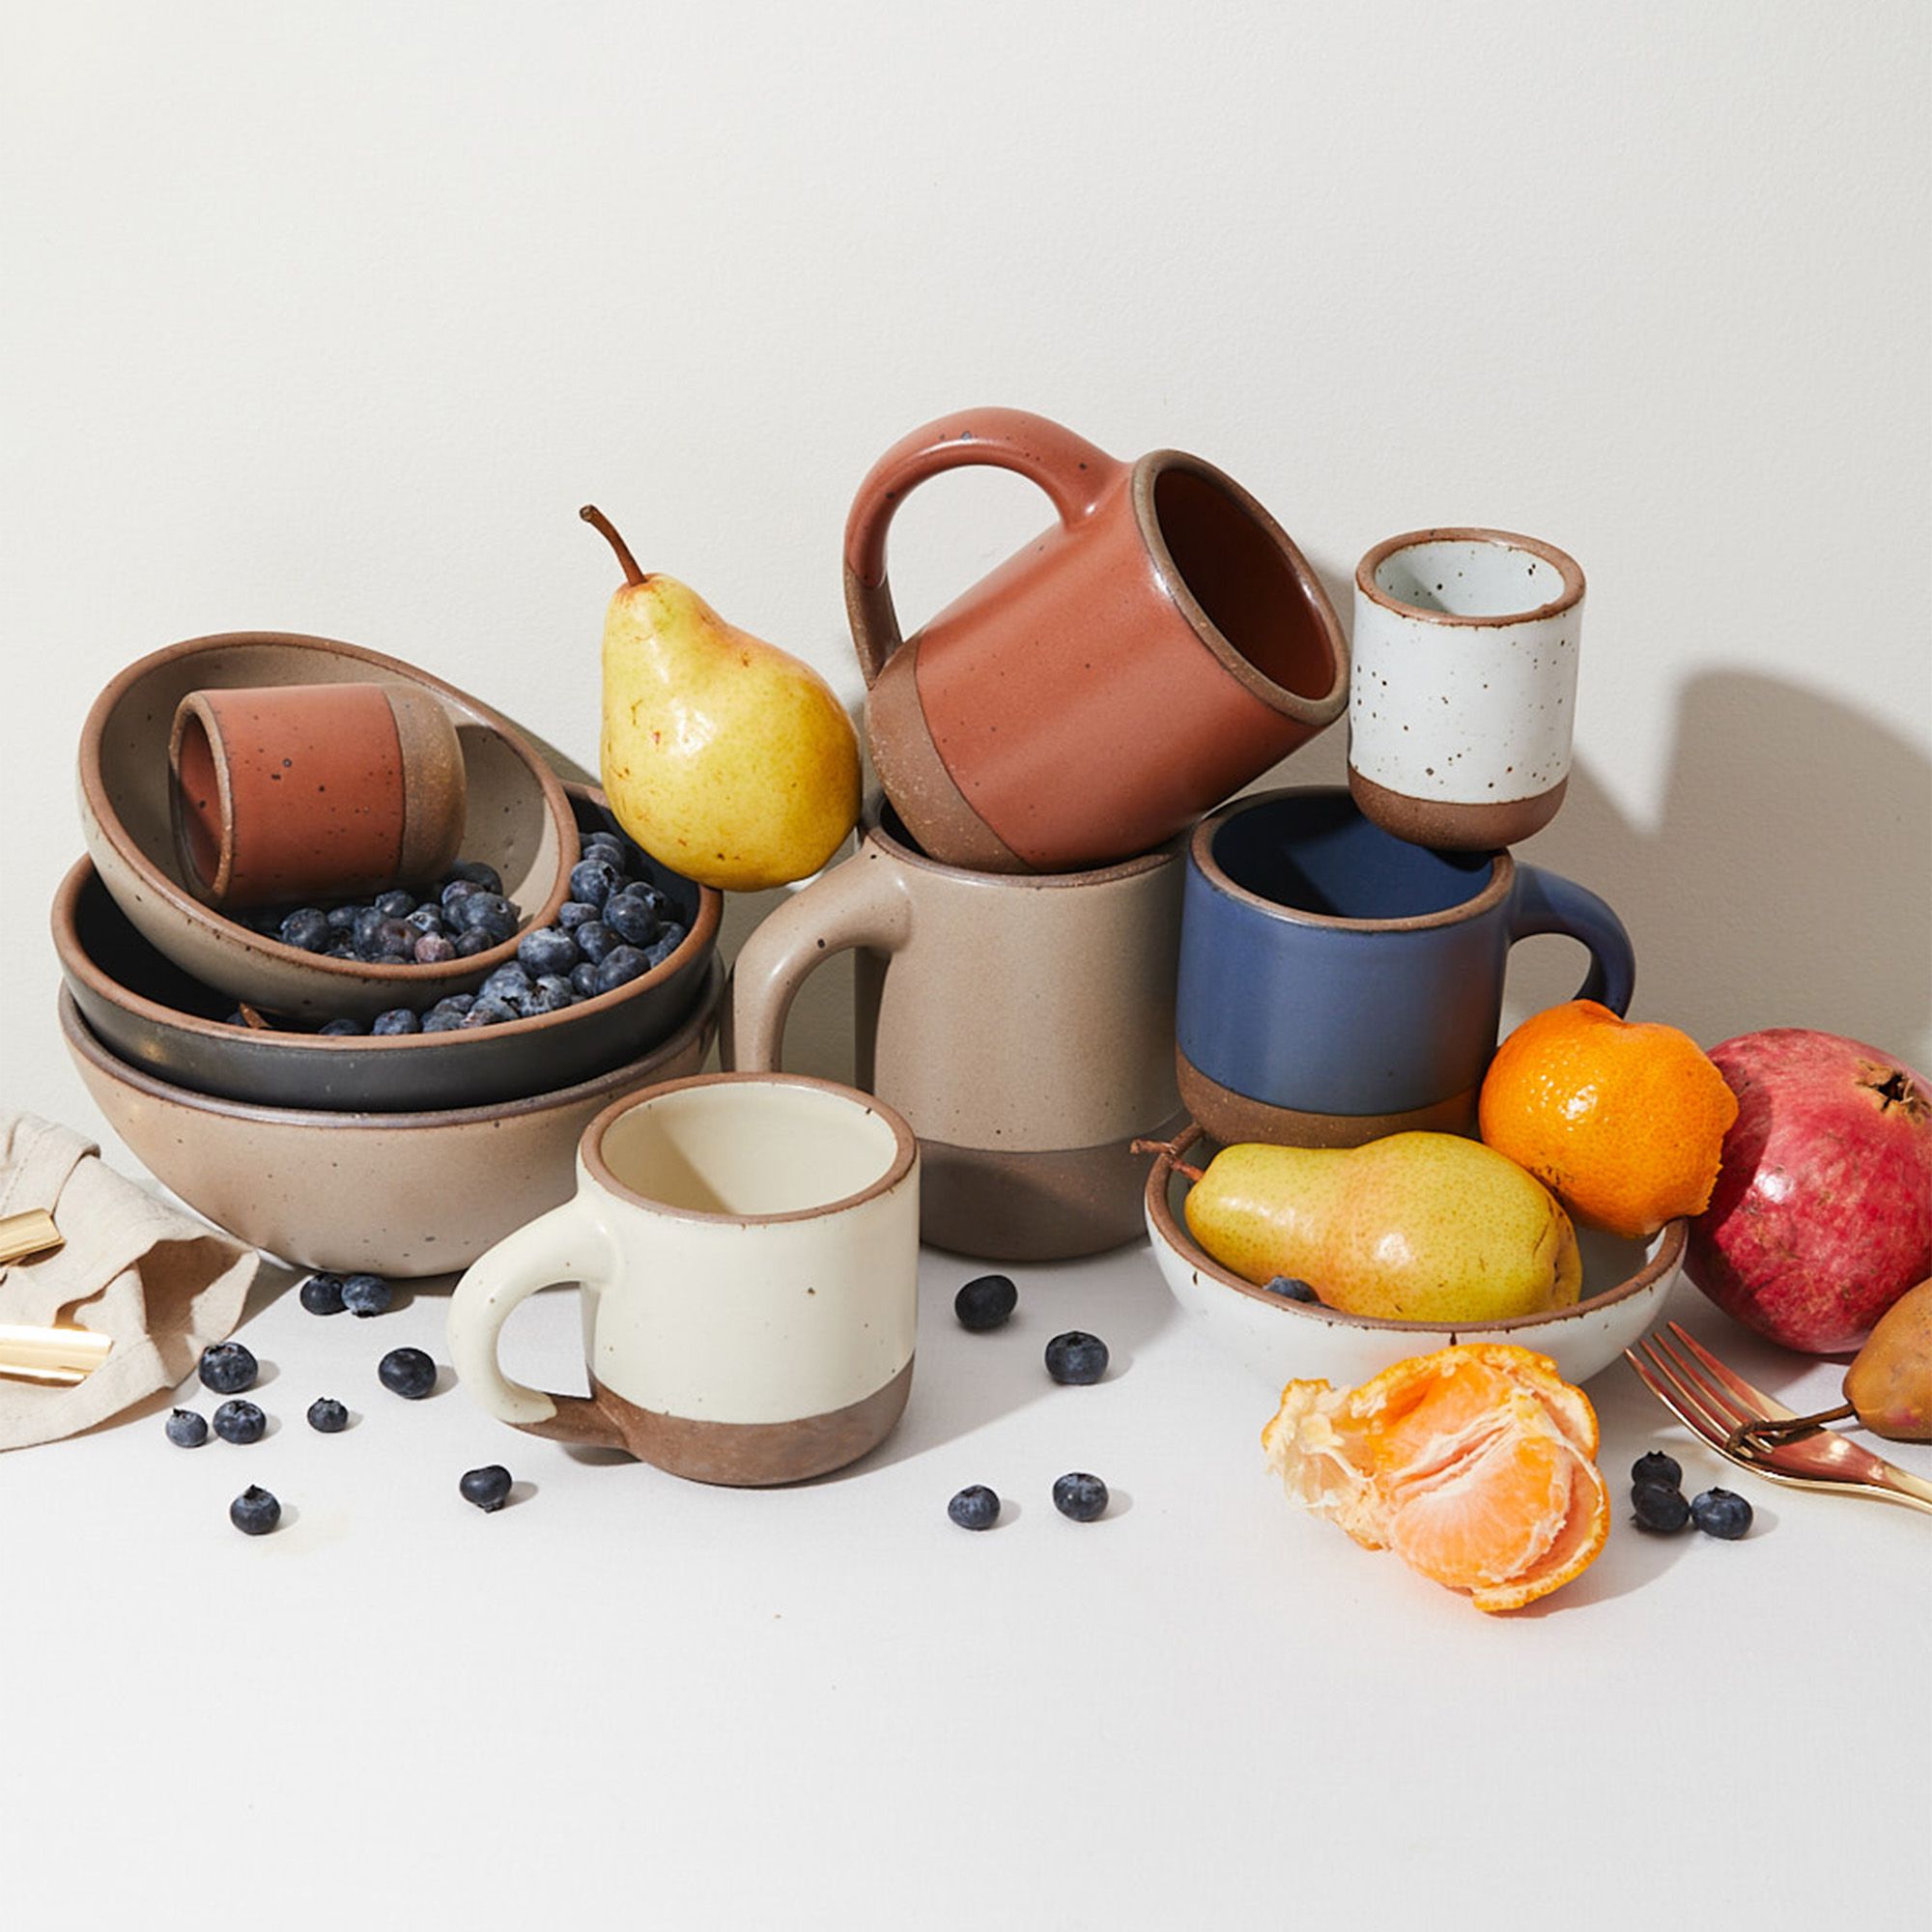 A styled photo of stacked bowls and various mugs and cups along with fruits, napkin, and fork